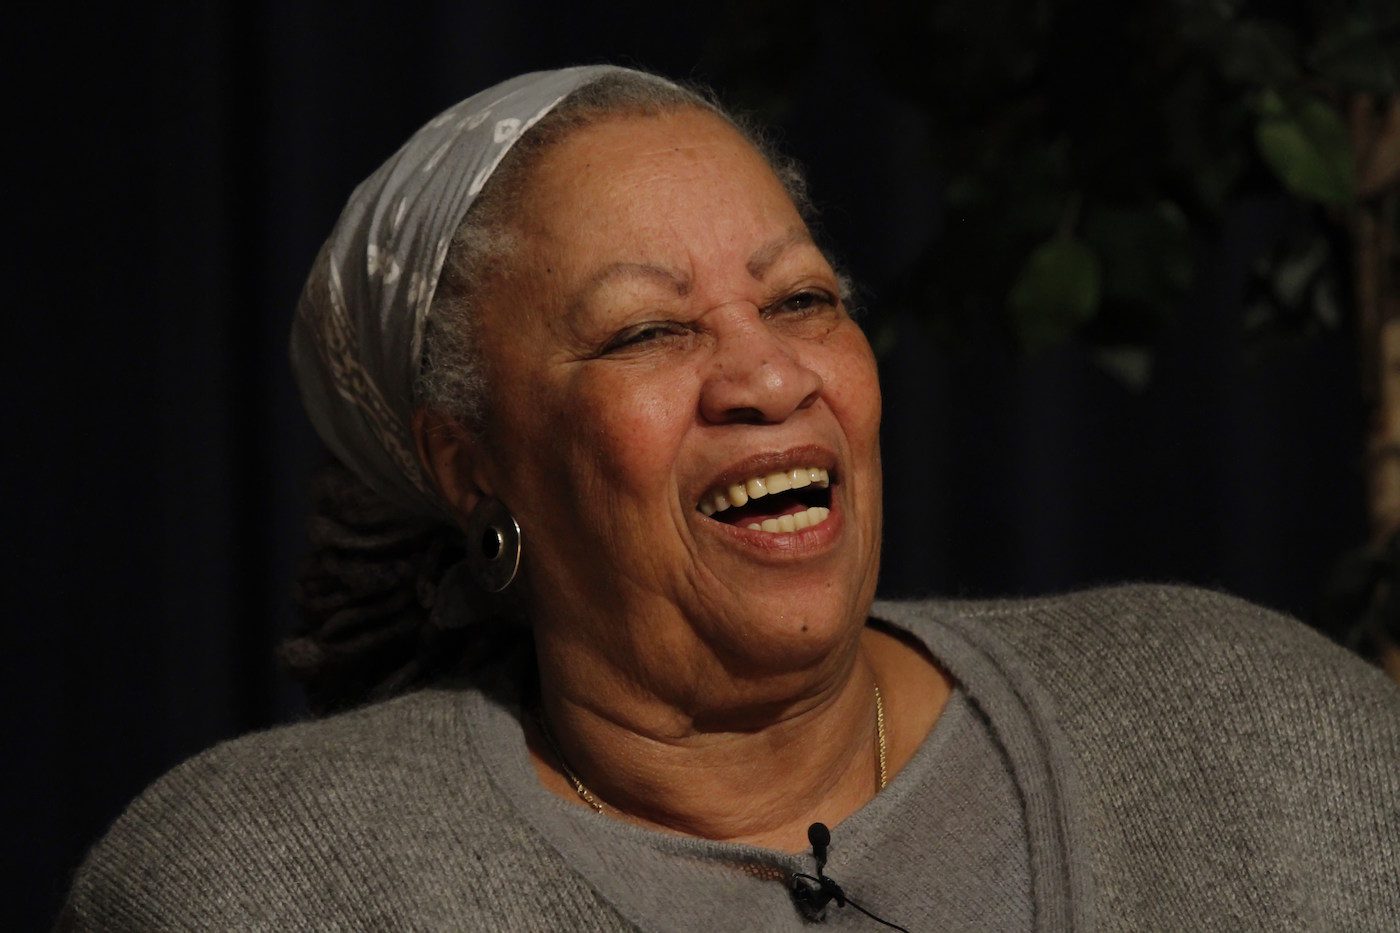 Toni Morrison lecture at West Point Military Academy in March, 2013. Photo via Wikipedia.